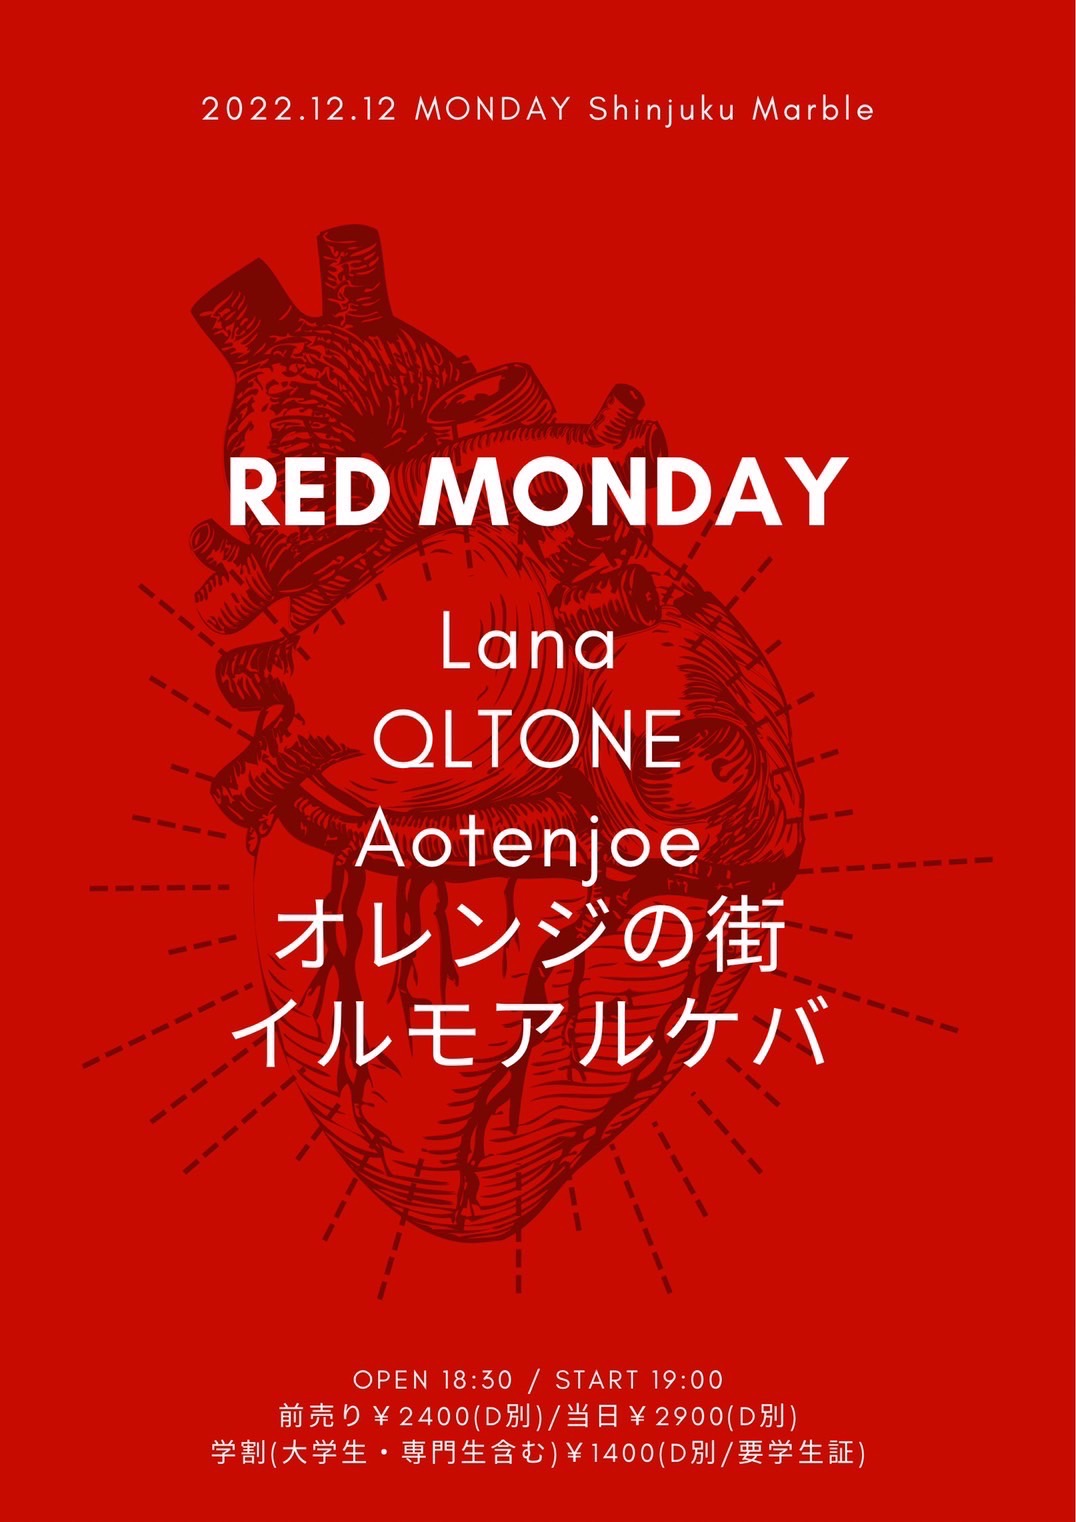 RED MONDAY